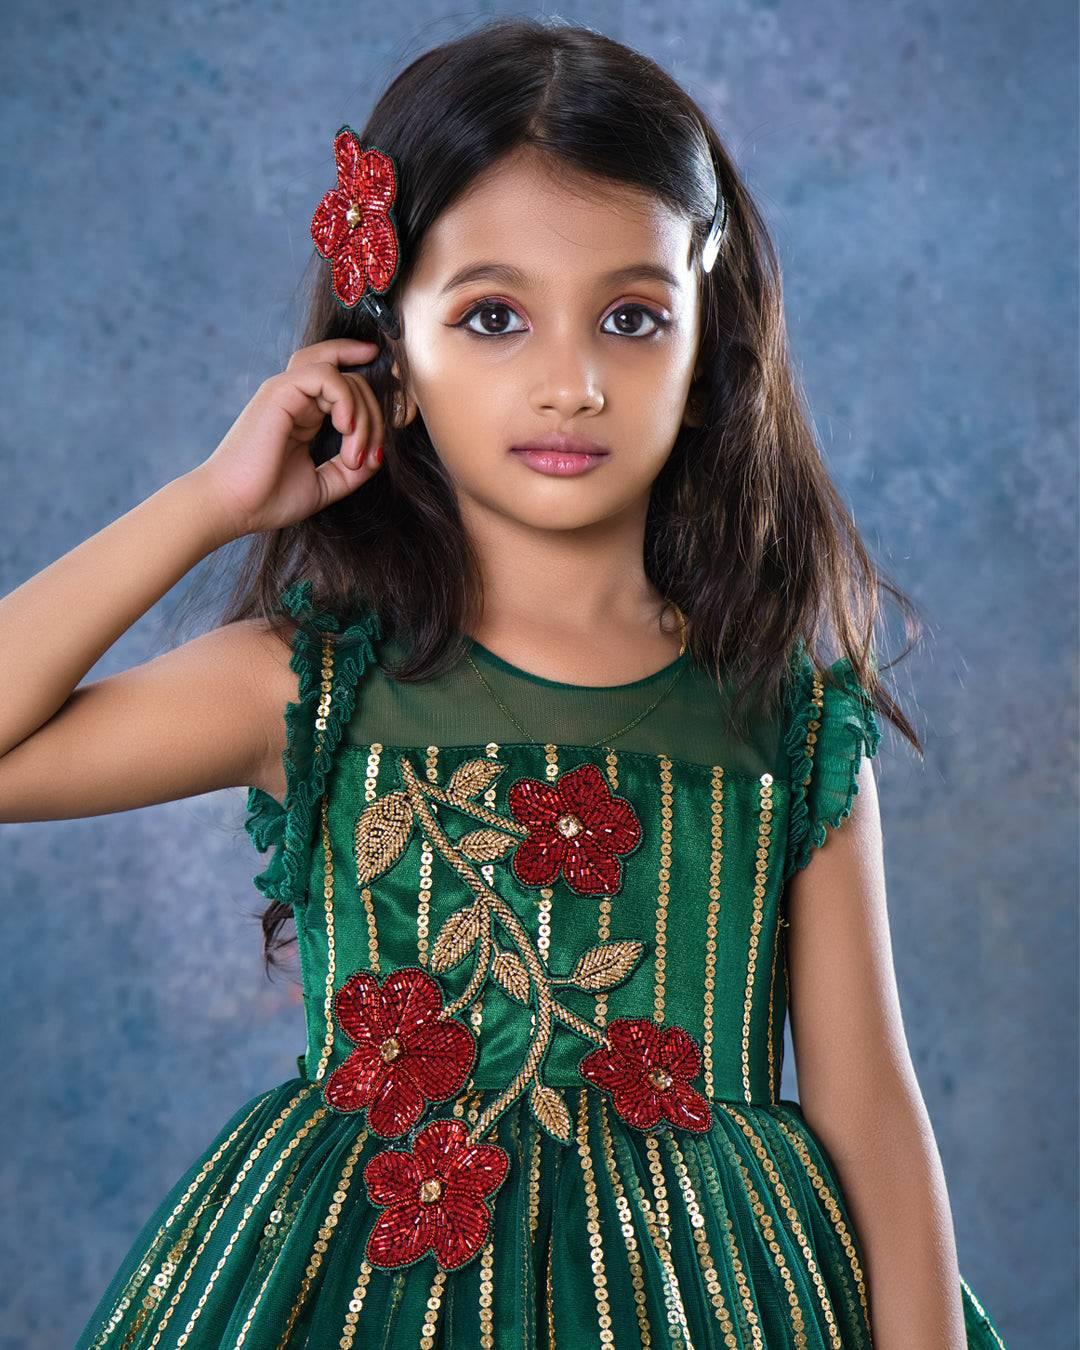 Bottle Green Designer Handwork Designer Flower Frock
Material: Bottle green colour Embroidery net frock with ruffled bottom. Heavy handwork red flower applique is given in the chest portion. Premium quality sequins wo